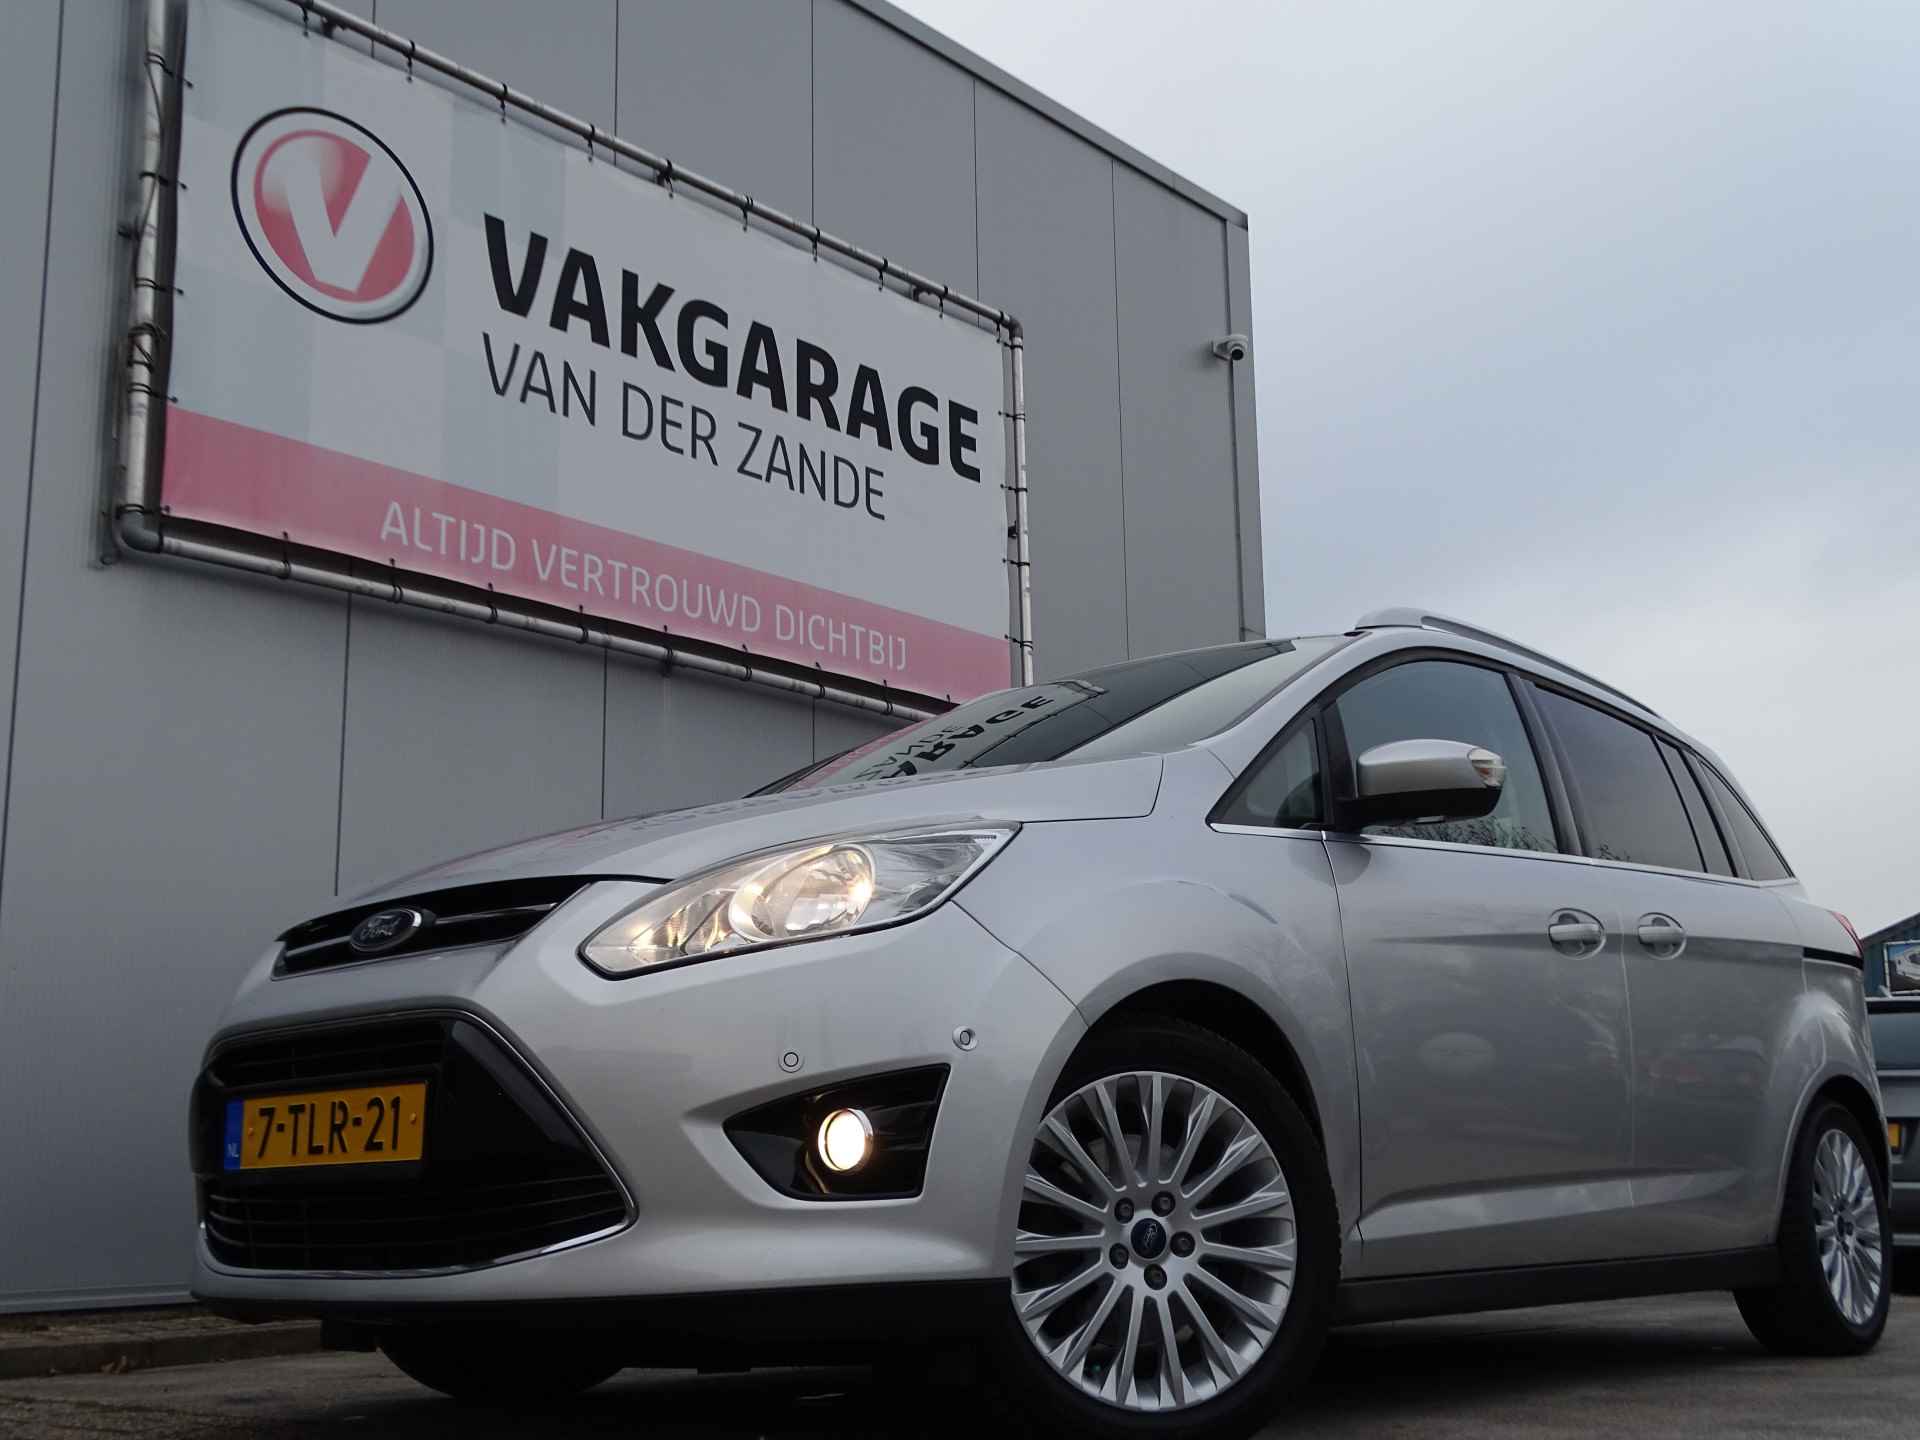 Ford Grand C-Max 1.0 Ed Plus 7 PERSOONS, Cruise Control, Camera, Compleet, NAP! - 66/70